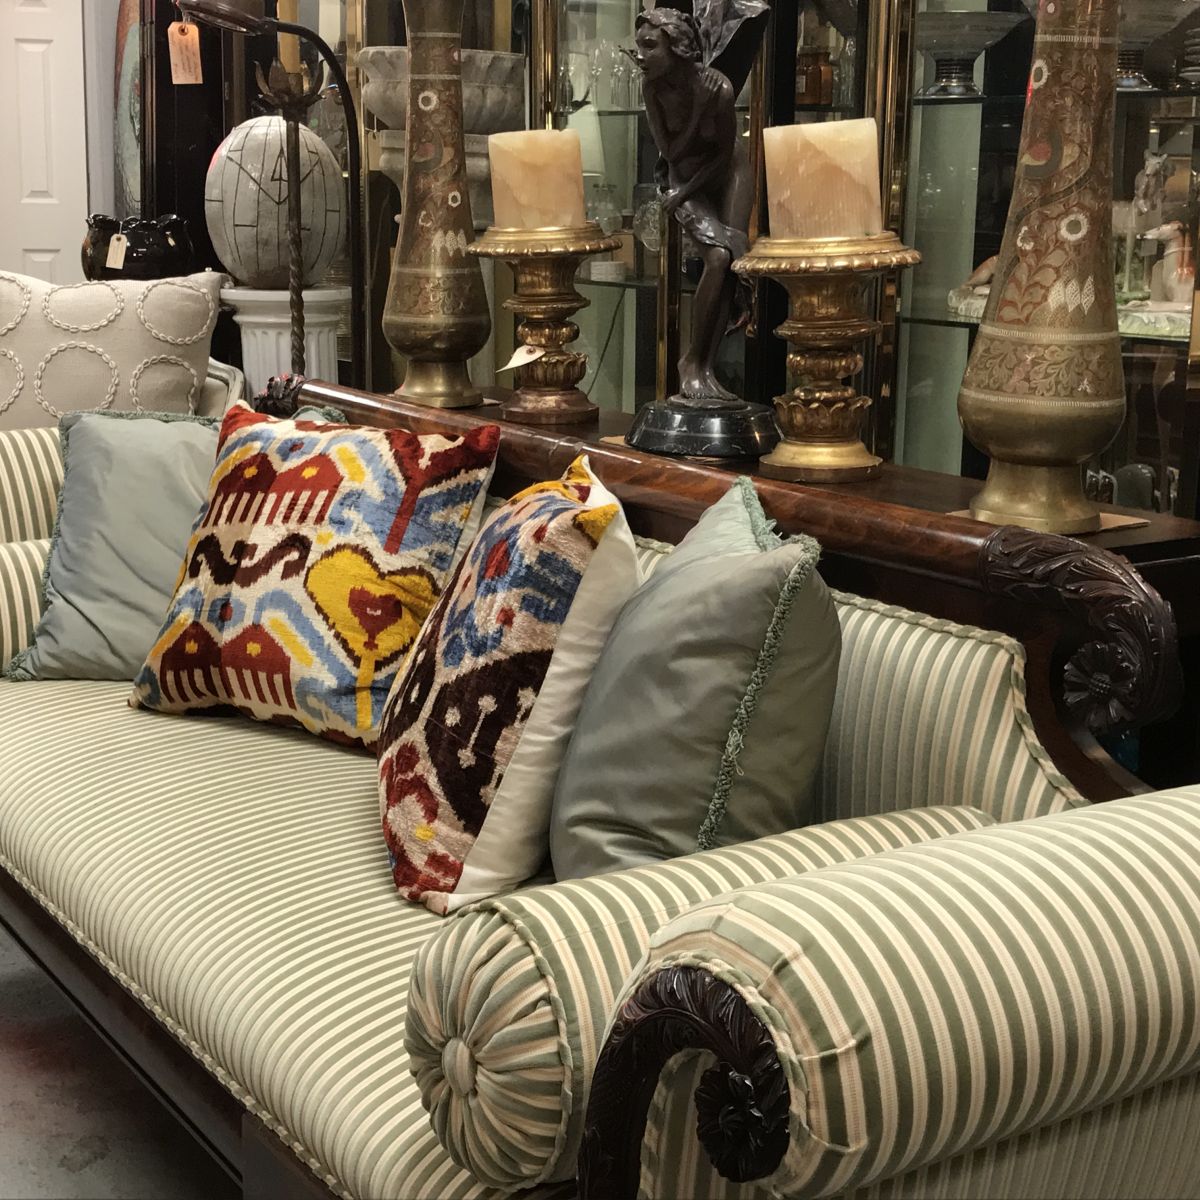 Interesting pillow patterns update the look of this antique settee